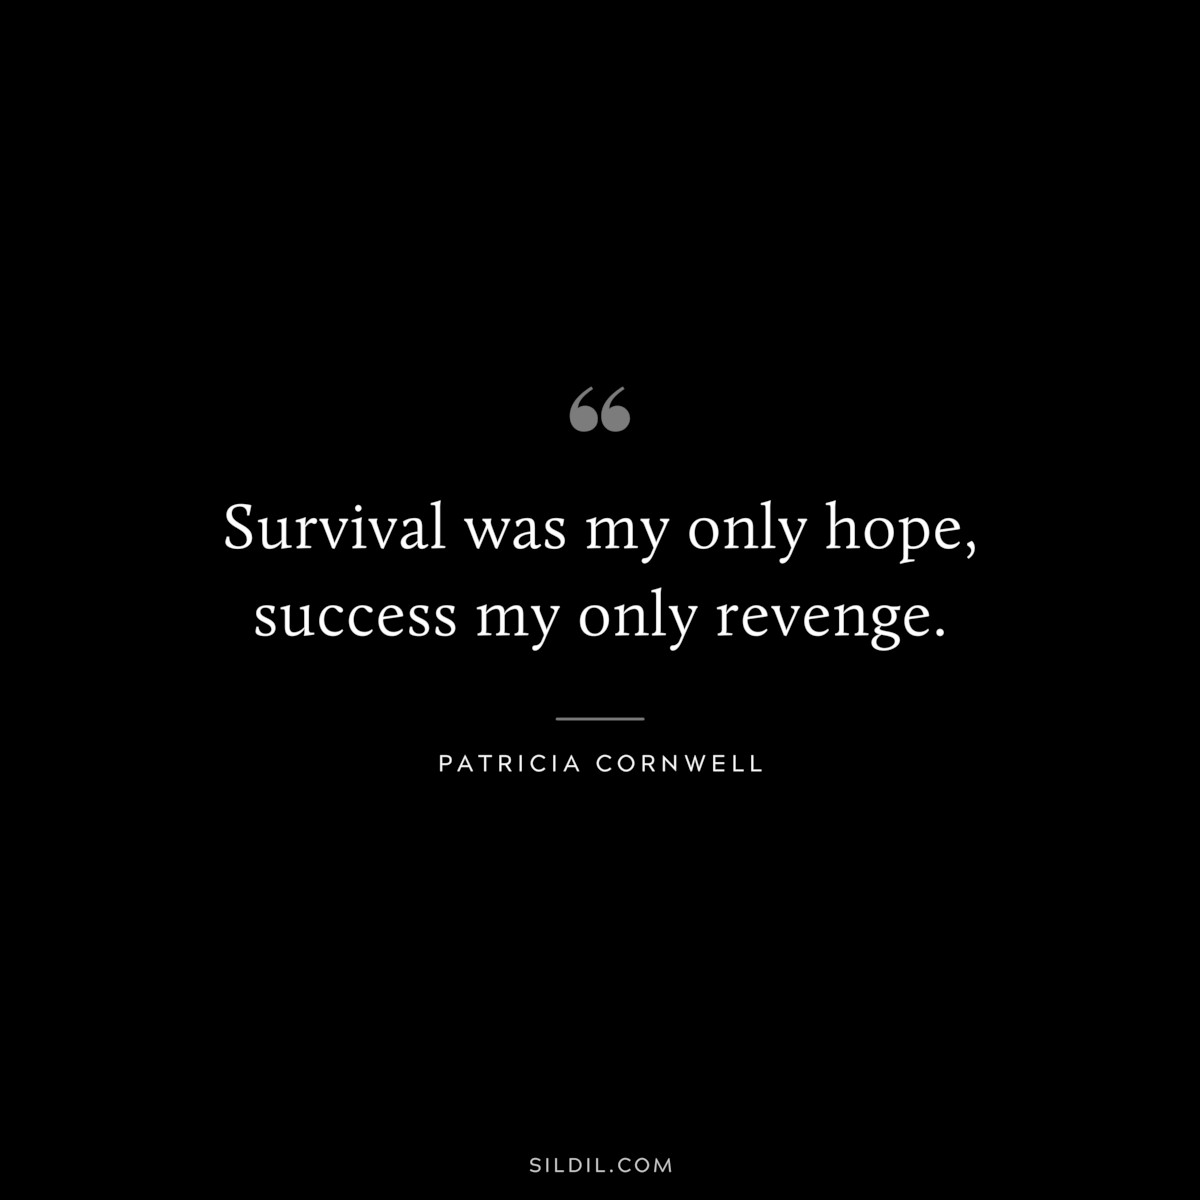 Survival was my only hope, success my only revenge. ― Patricia Cornwell